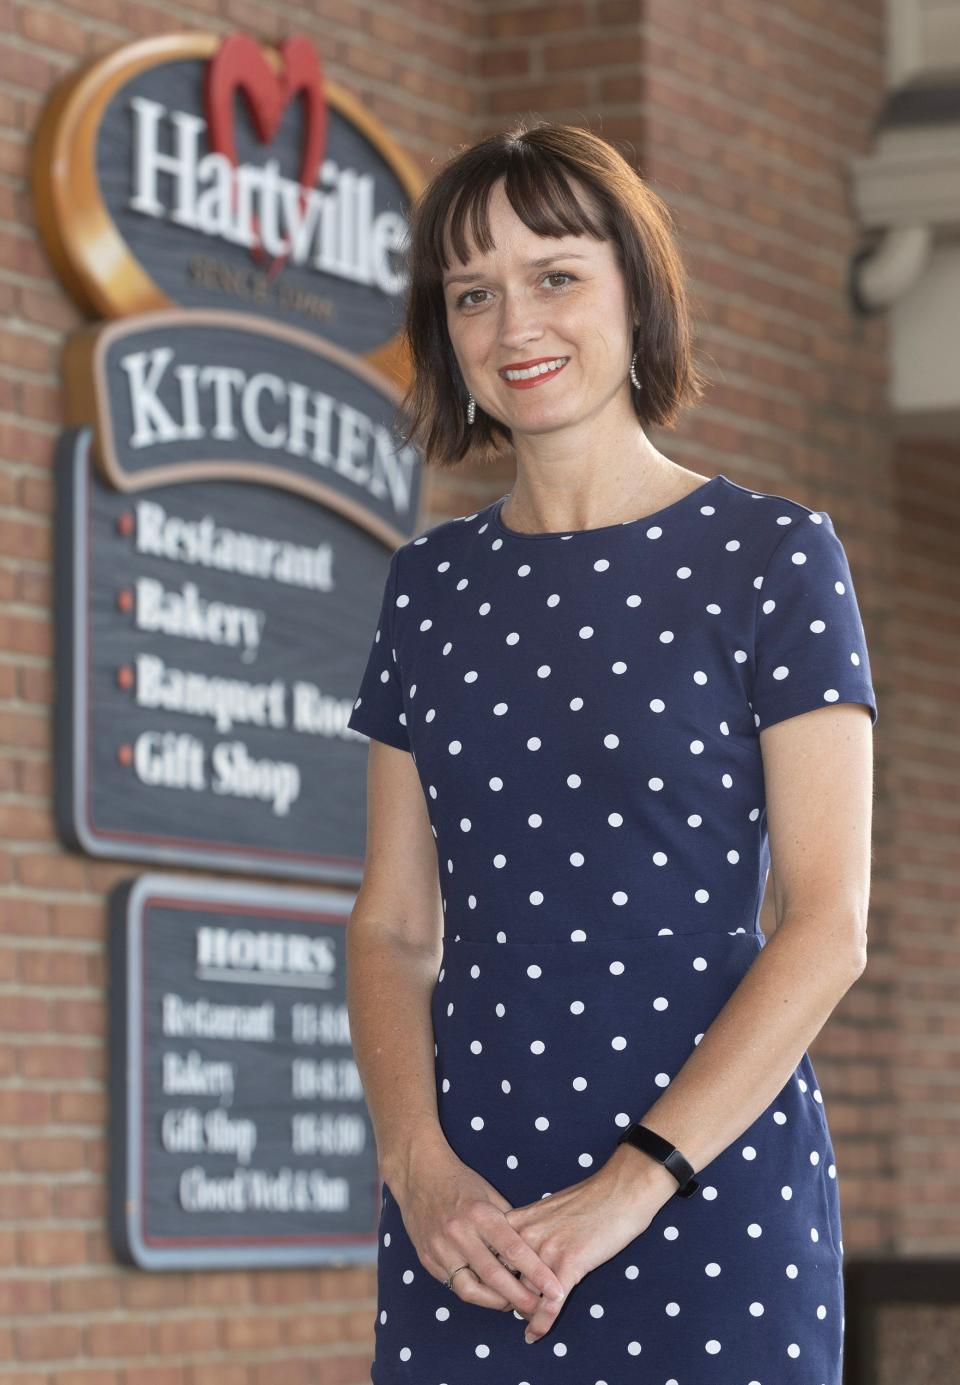 Christa Kozy is the marketing and group tours coordinator for Hartville Kitchen Restaurant & Bakery in Hartville. She also coordinates the destination marketing campaigns and outreach events for the campus, which includes Hartville Hardware, Hartville MarketPlace and Hartville Kitchen Restaurant & Bakery.